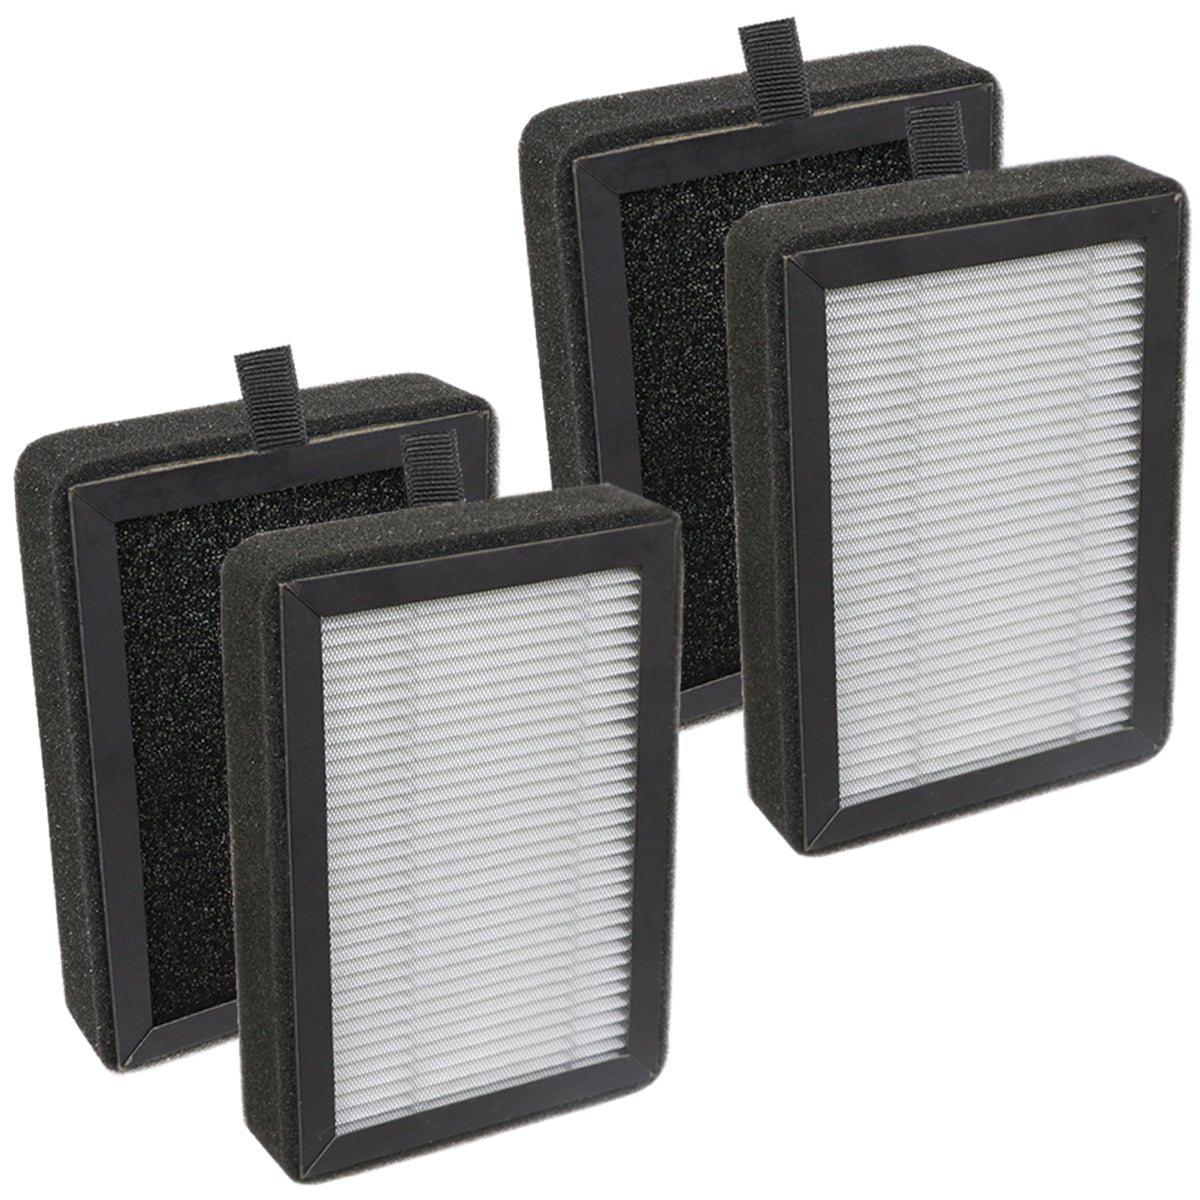 Ture HEPA Filter H13 Replacement For LEVOIT LV-H128 LV-H128-RF Air